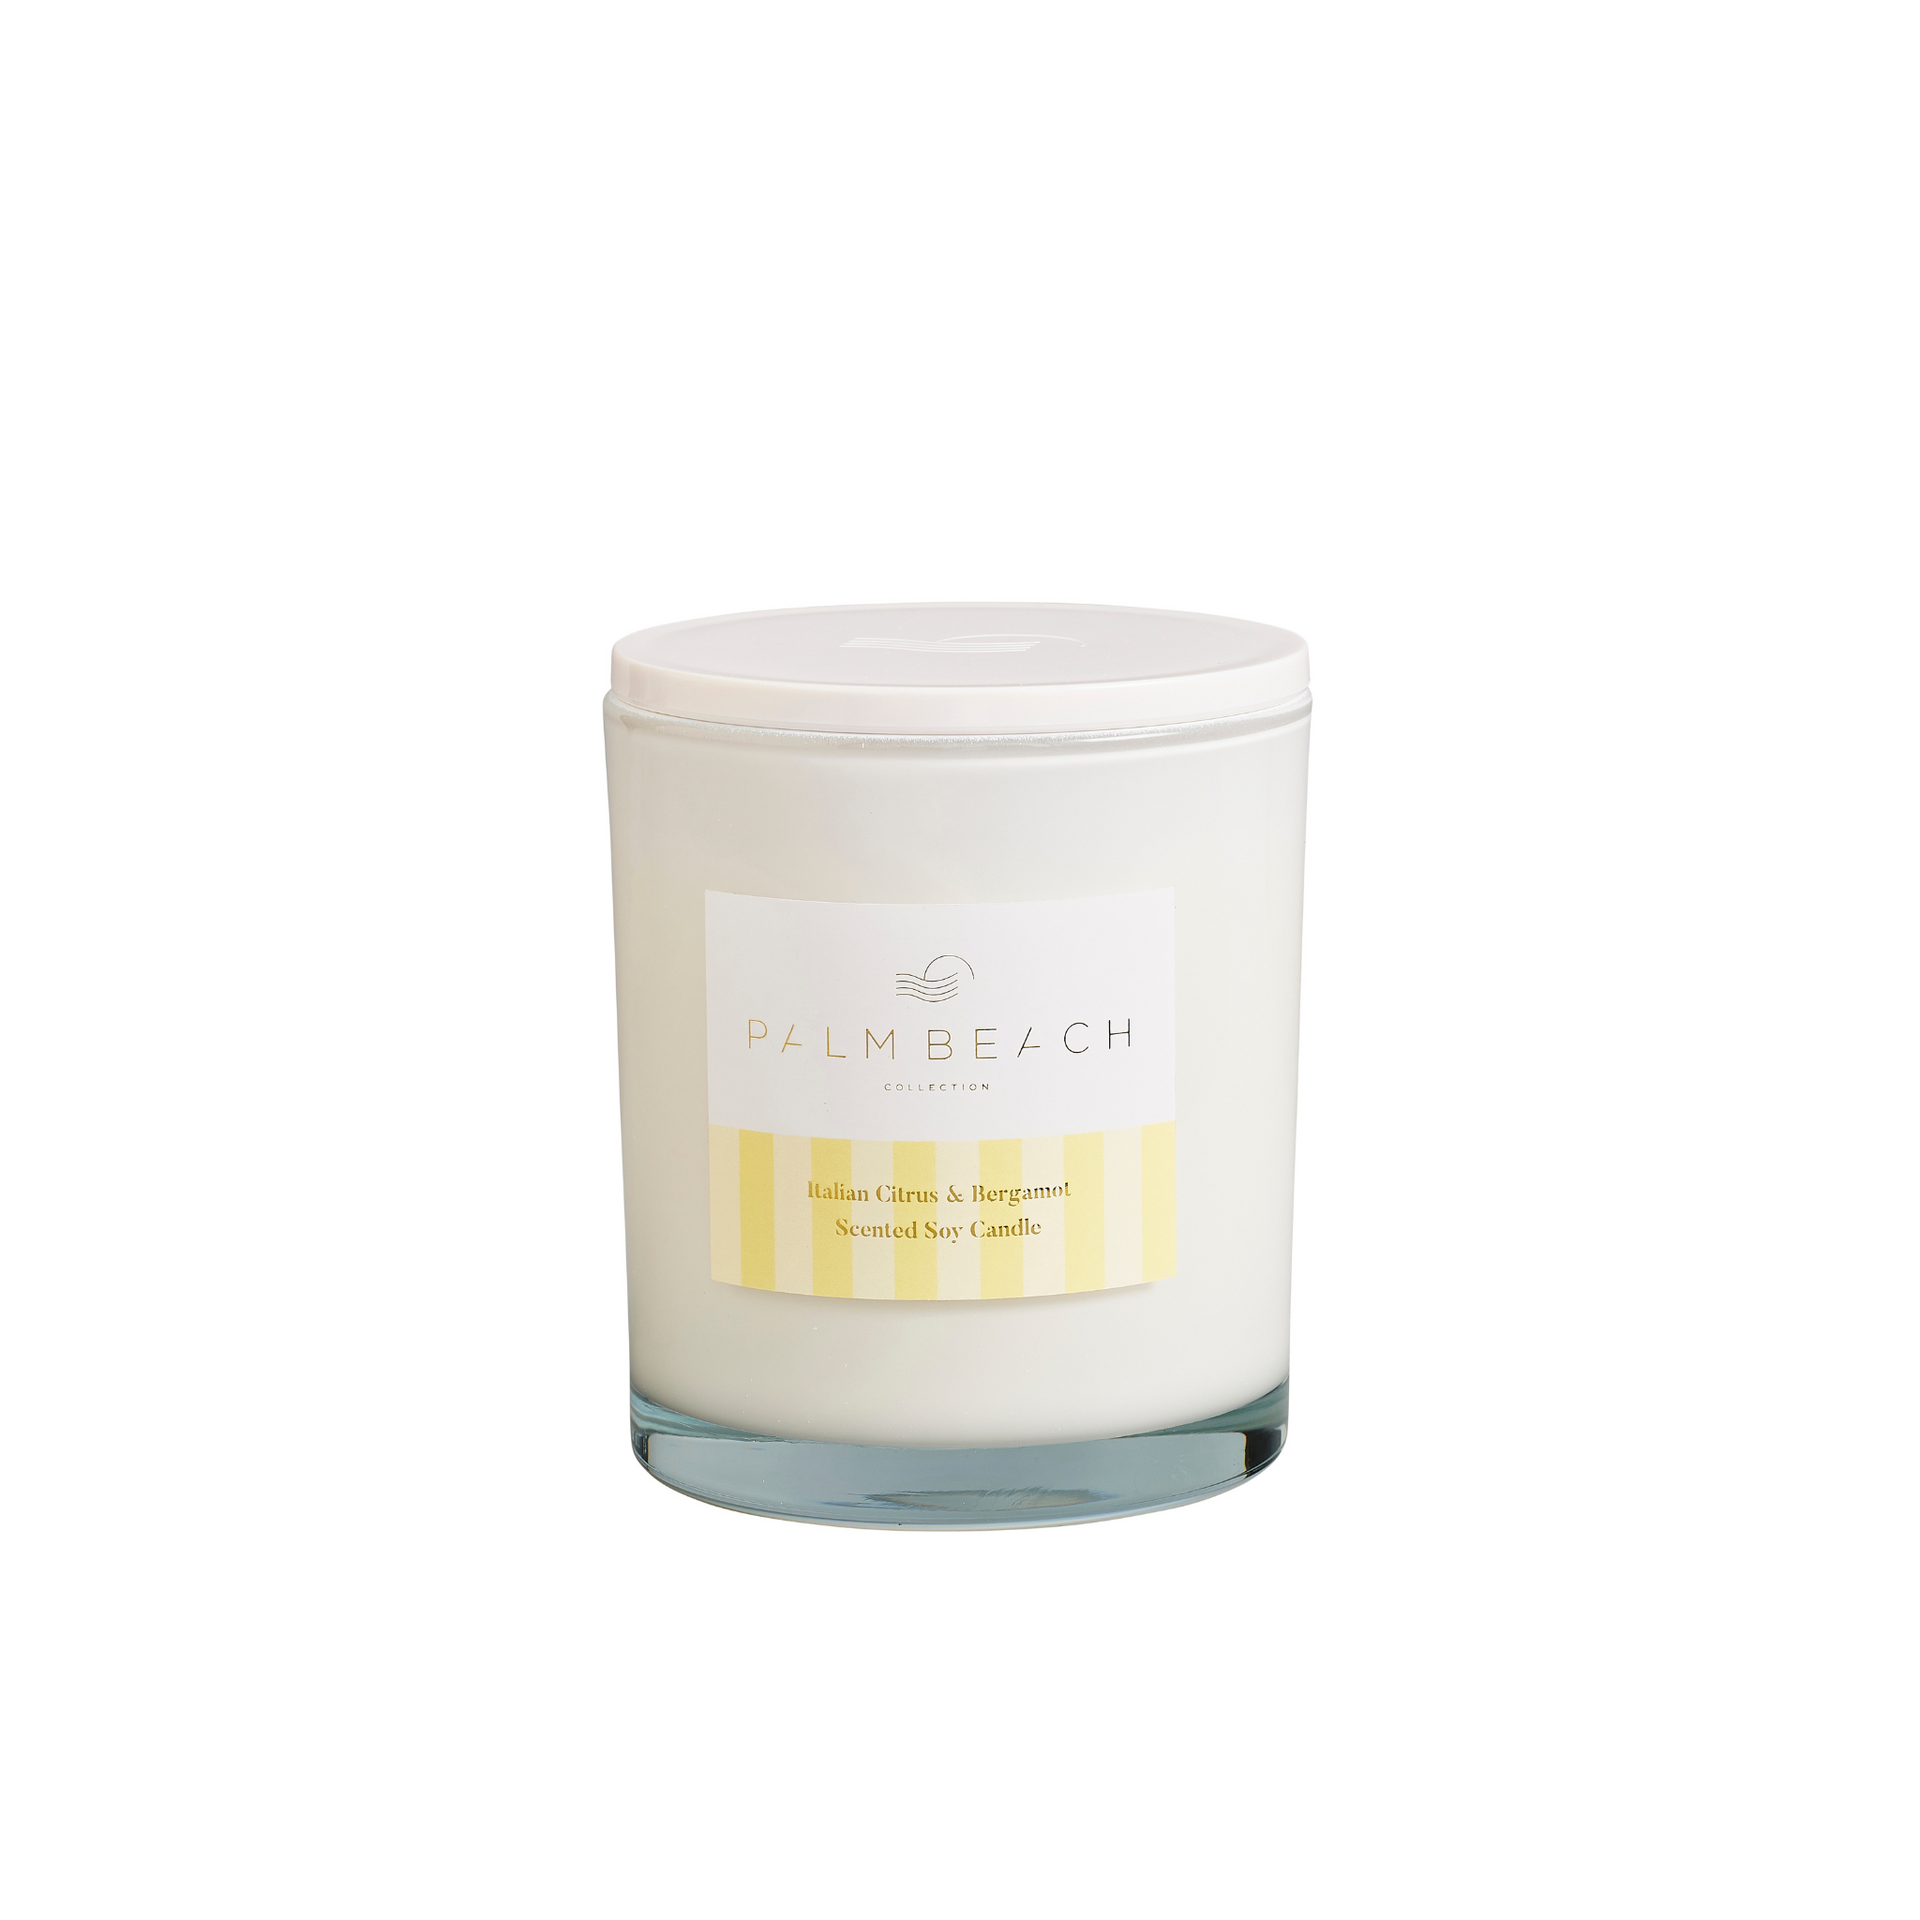 Italian Citrus & Bergamot <br> UNBOXED 420g Limited Edition Standard Candle